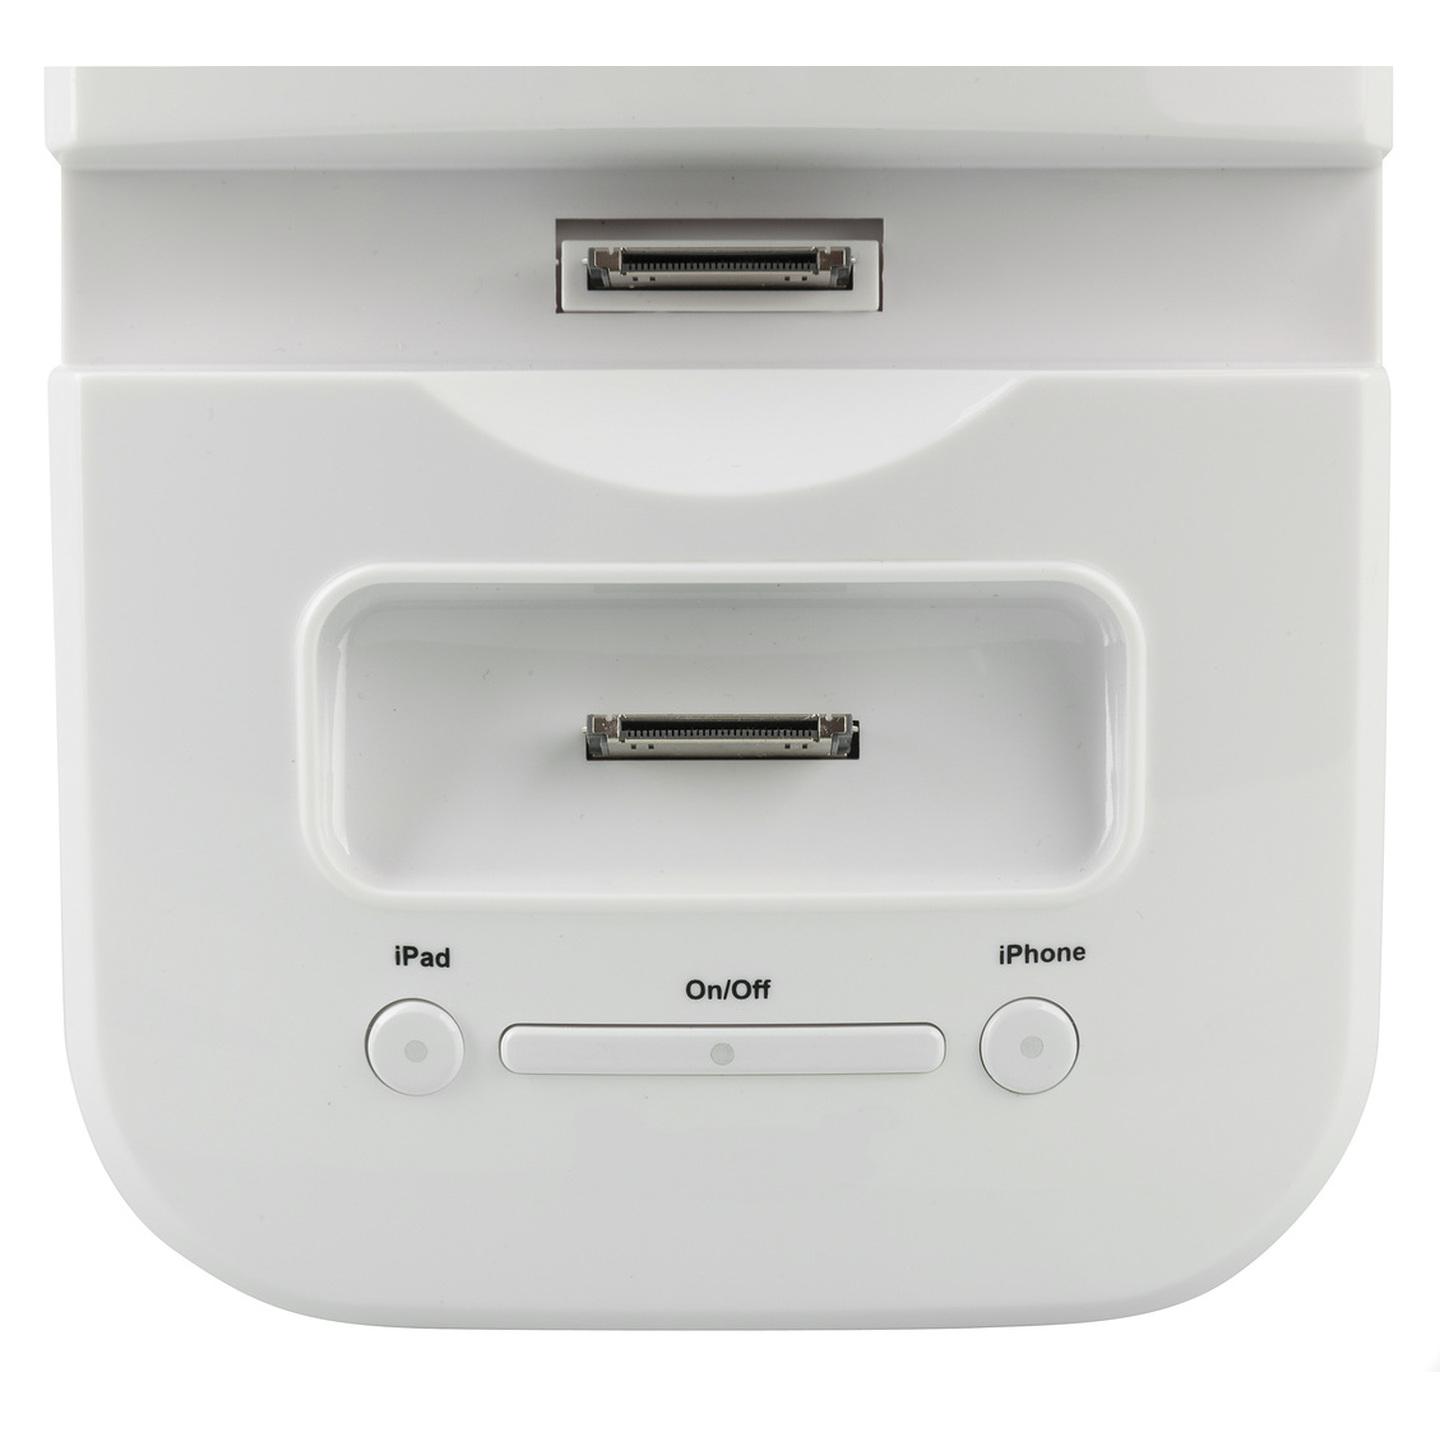 Docking Station and Dual Charger for iPad and iPhone/iPod